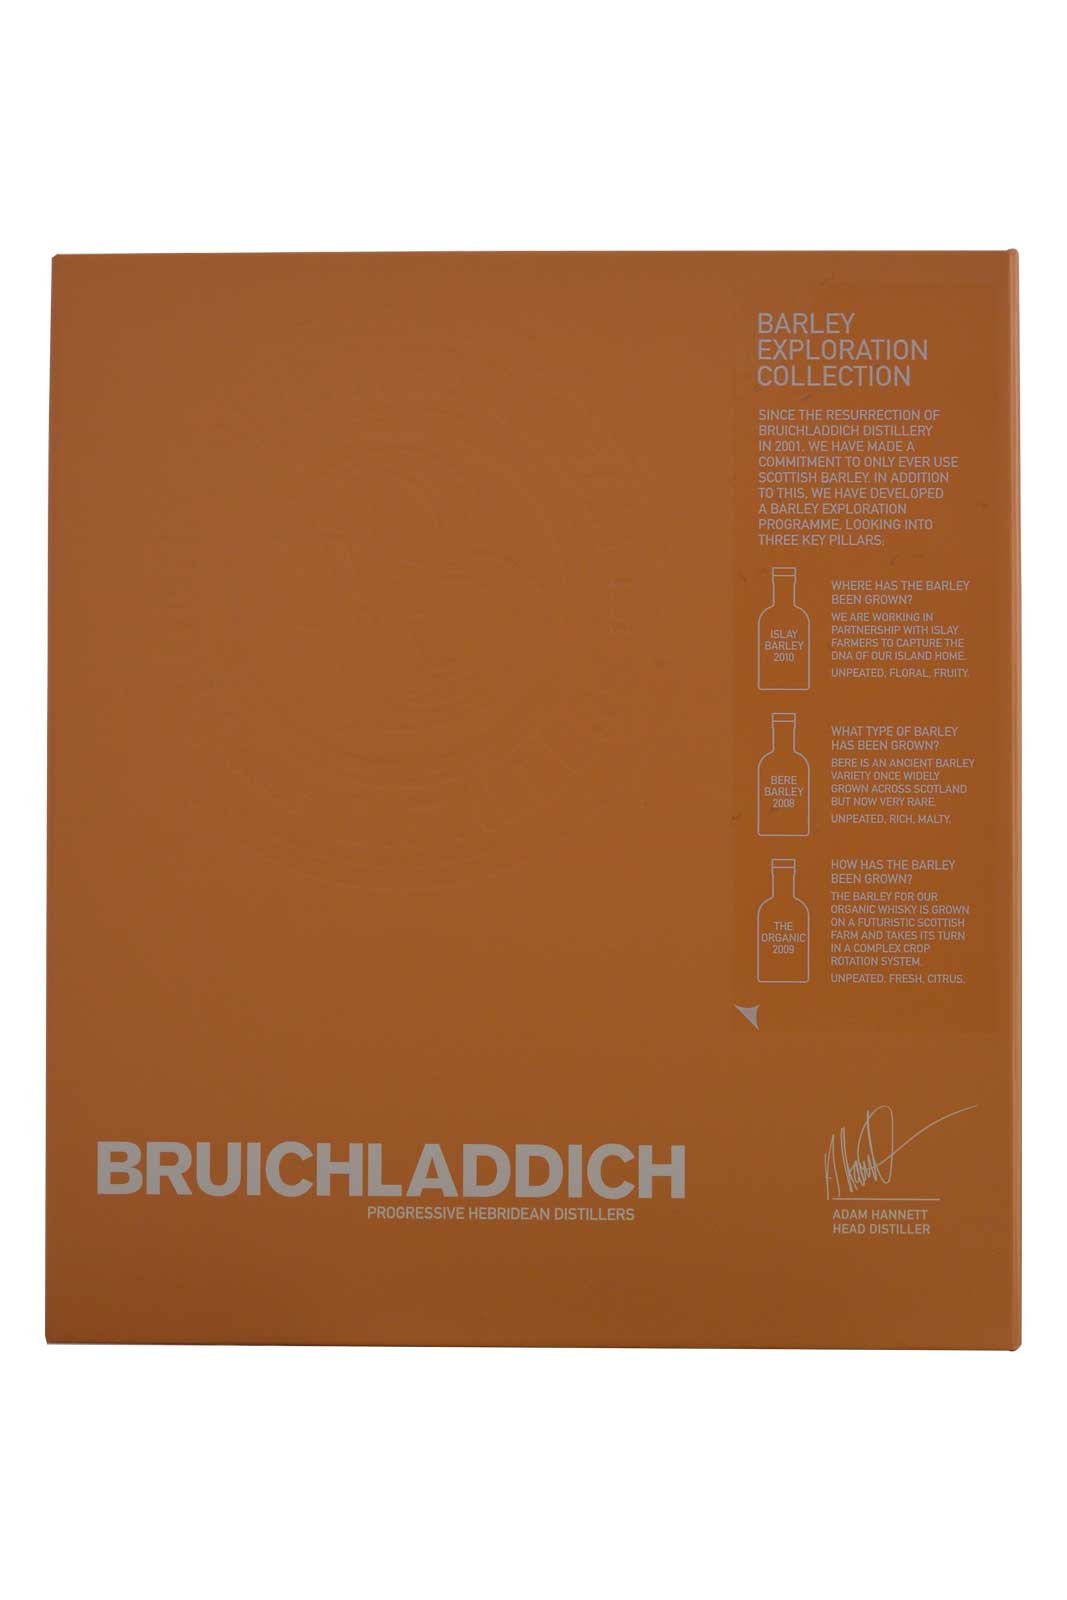 Bruichladdich Barley Exploration Collection - 3 x 20cl